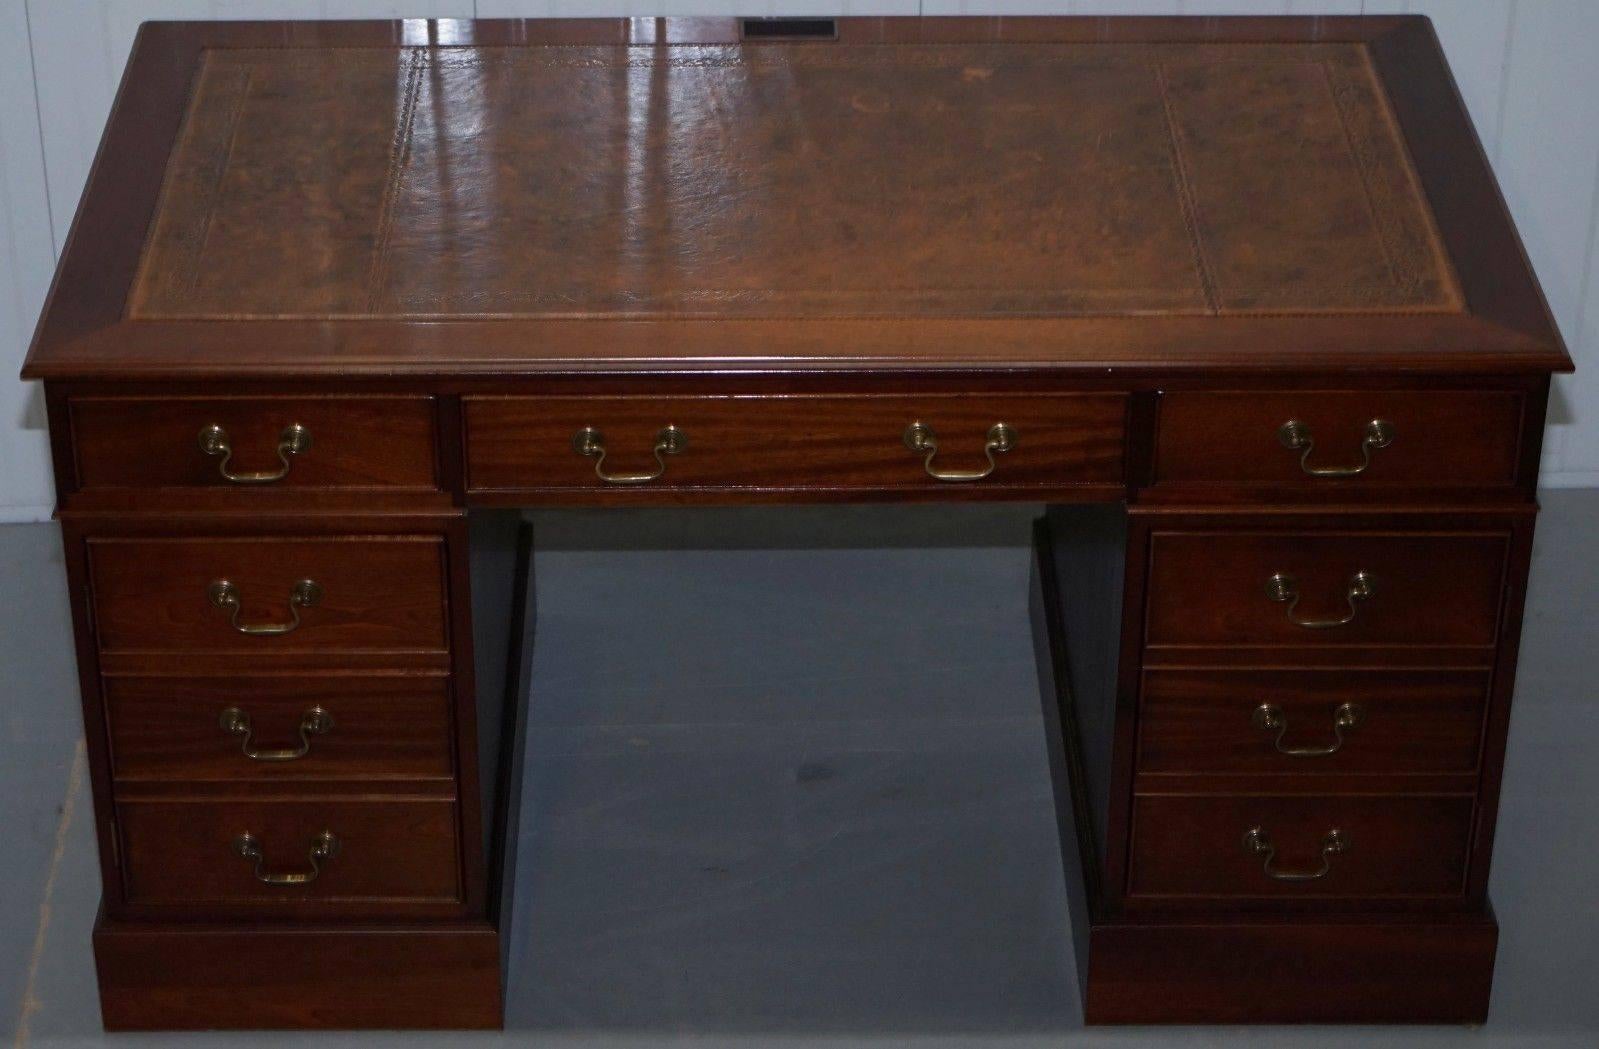 We are delighted to offer for sale this lovely twin pedestal partner desk with brown leather top and mahogany frame, specifically designed to house a computer

A very well made piece, this desk can hide an entire tower PC, the right pedestal is